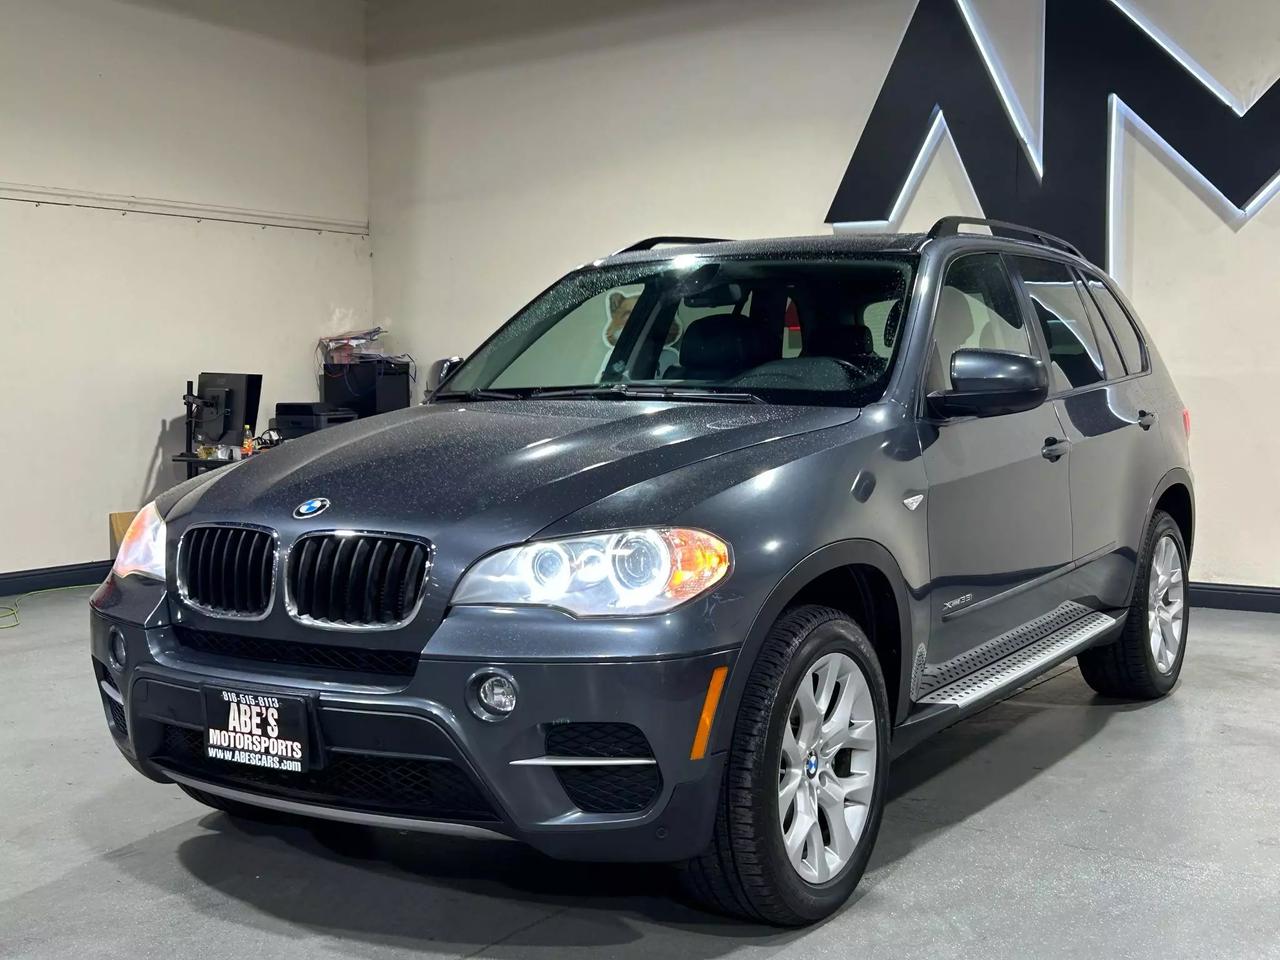 Used 2012 BMW X5 xDrive35i Premium with VIN 5UXZV4C57CL745711 for sale in Sacramento, CA